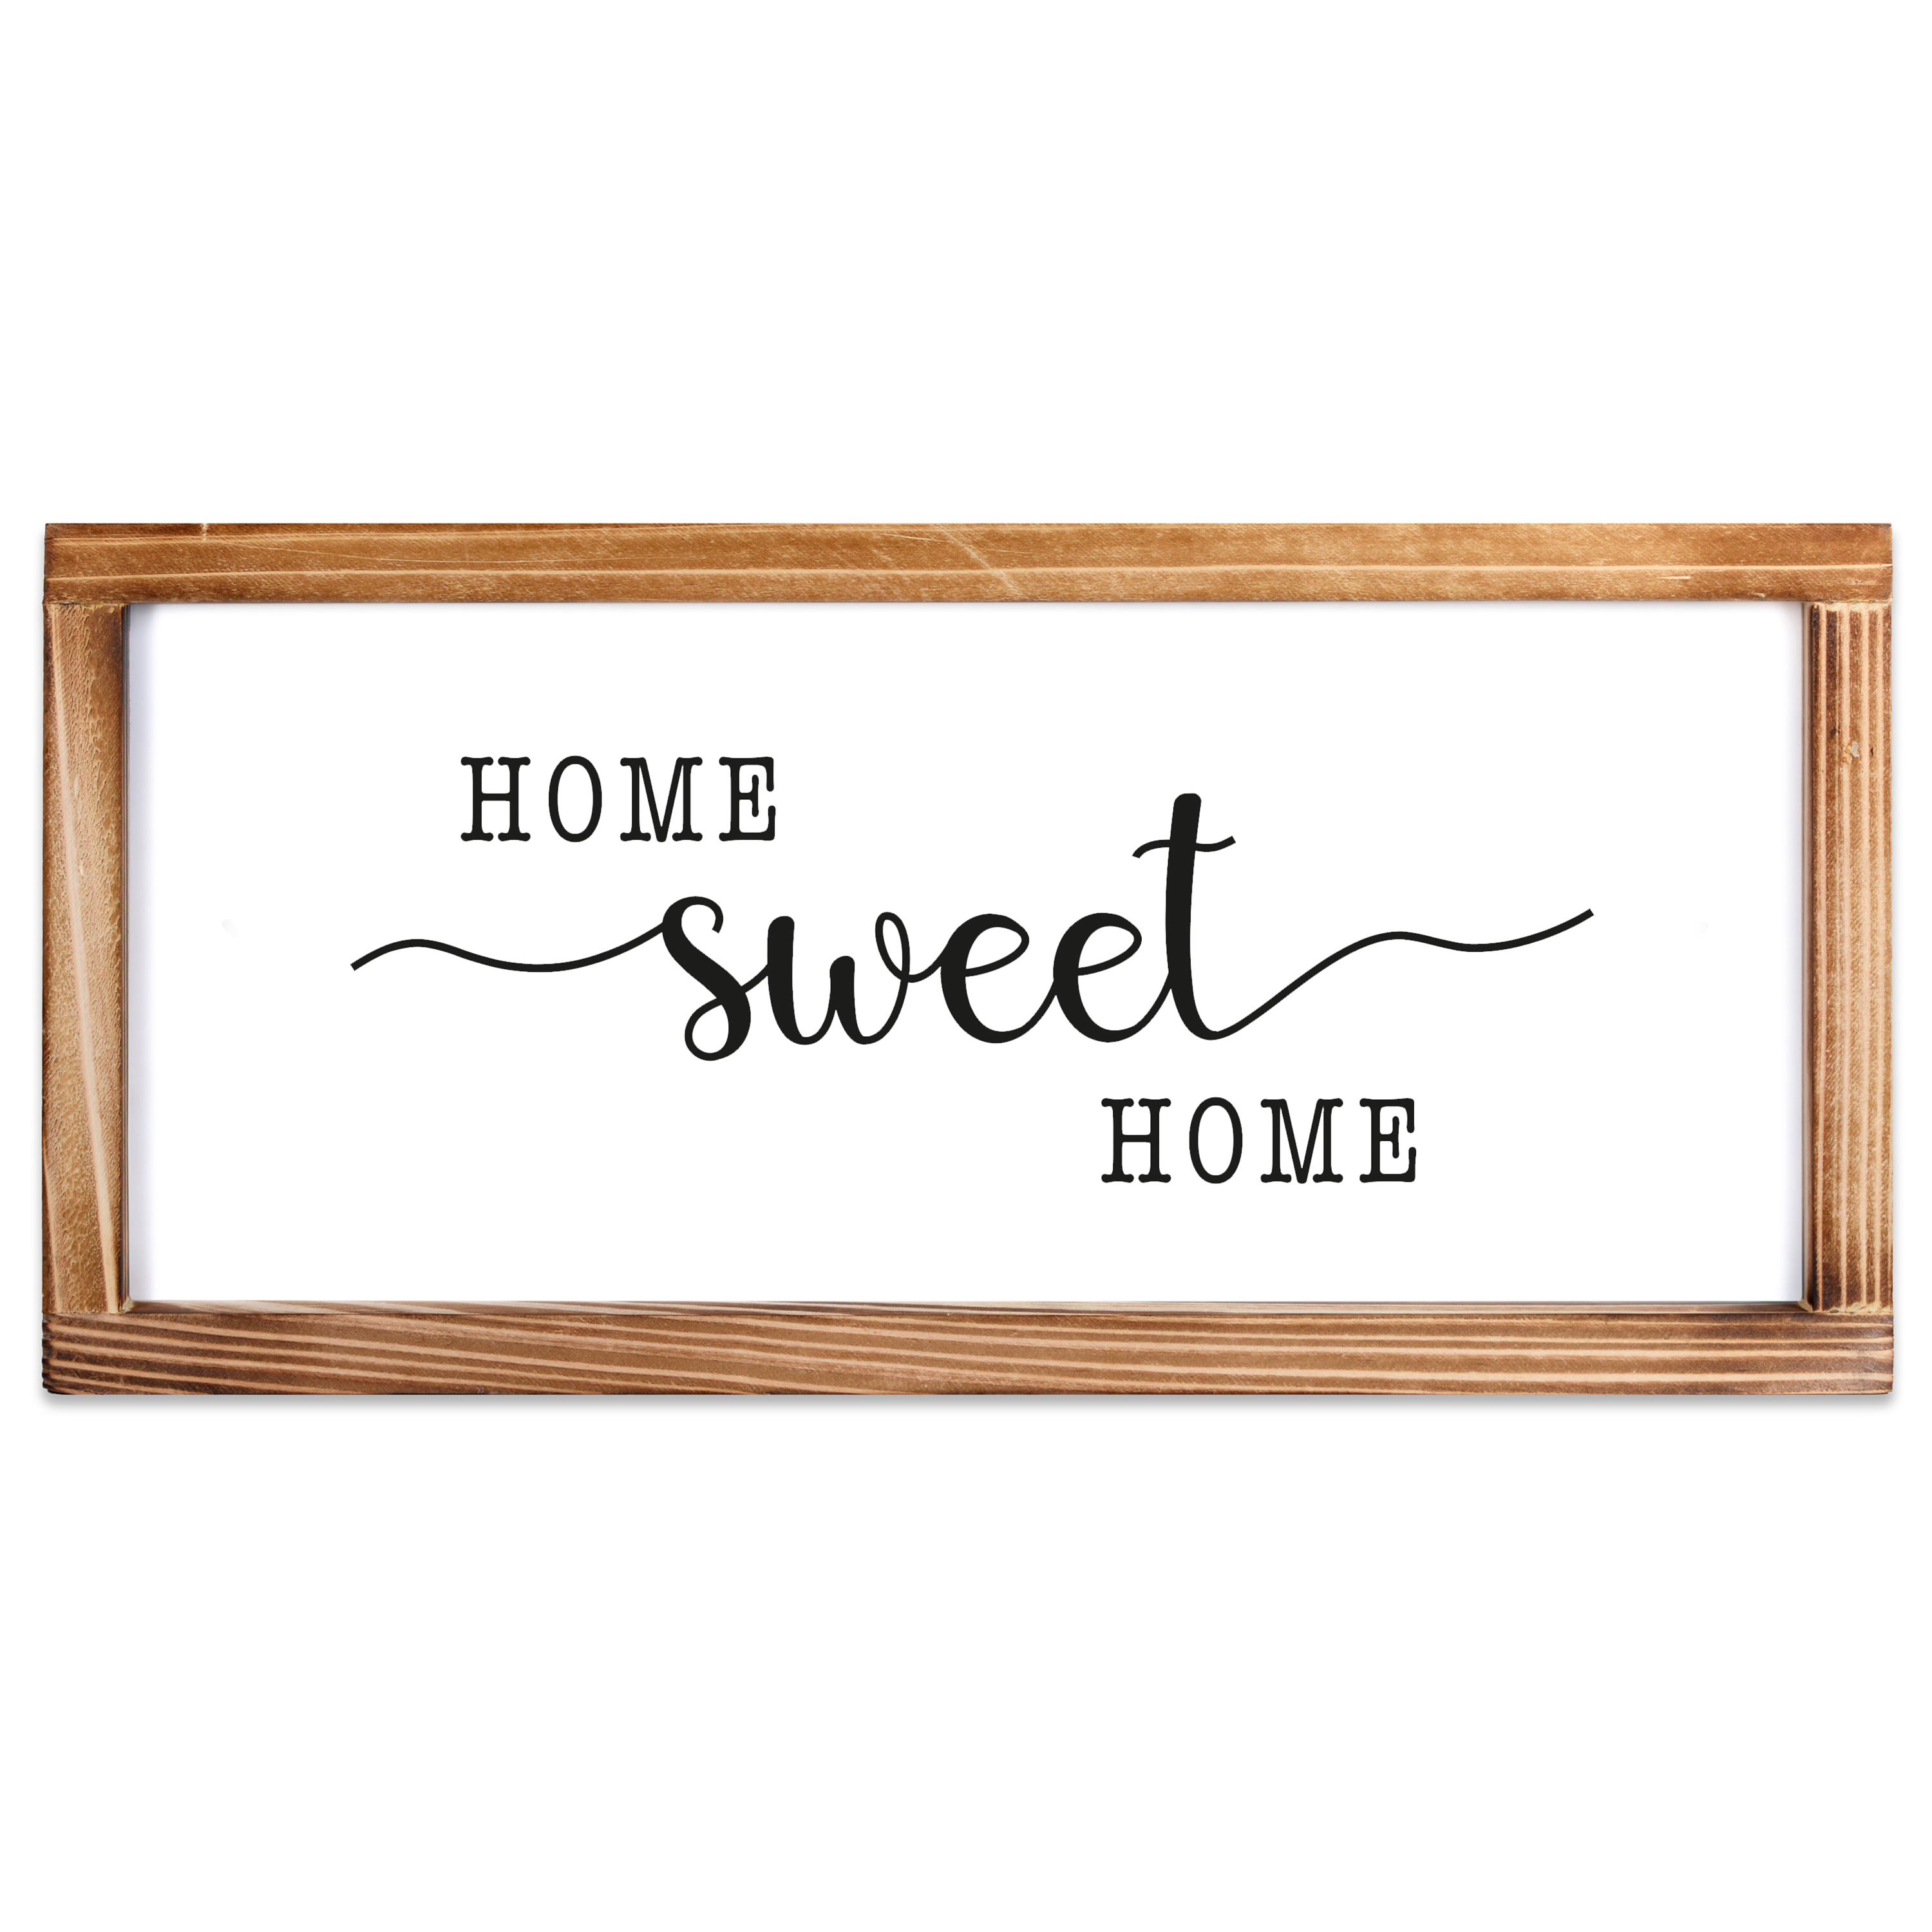 8x17 Inch Happiness is Homemade Sign Wall Decorations for Living Room Rustic Home Decor with Solid Wood Frame Modern Farmhouse Wall Decor Rustic Farmhouse Decor for the Home Sign